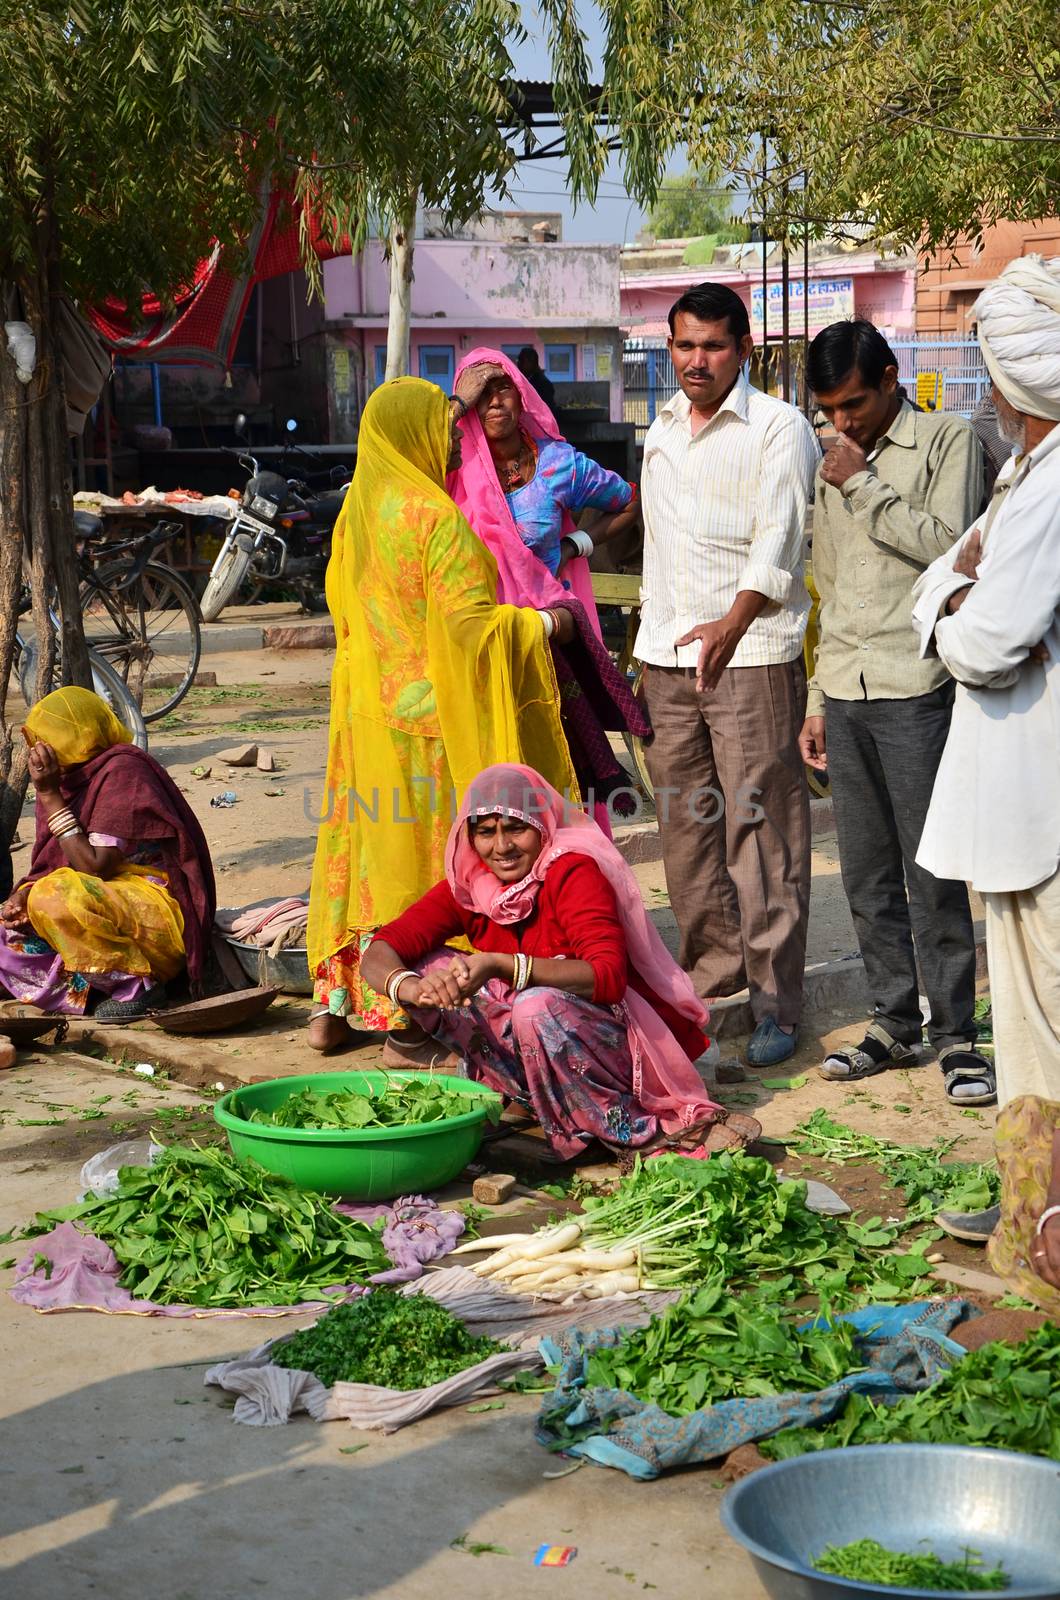 Jodhpur, India - January 2, 2015: Indian people shopping at typical vegetable street market in India on January 2, 2015 in Jodhpur, India. Food hawkers in India are generally unaware of standards of hygiene and cleanliness.